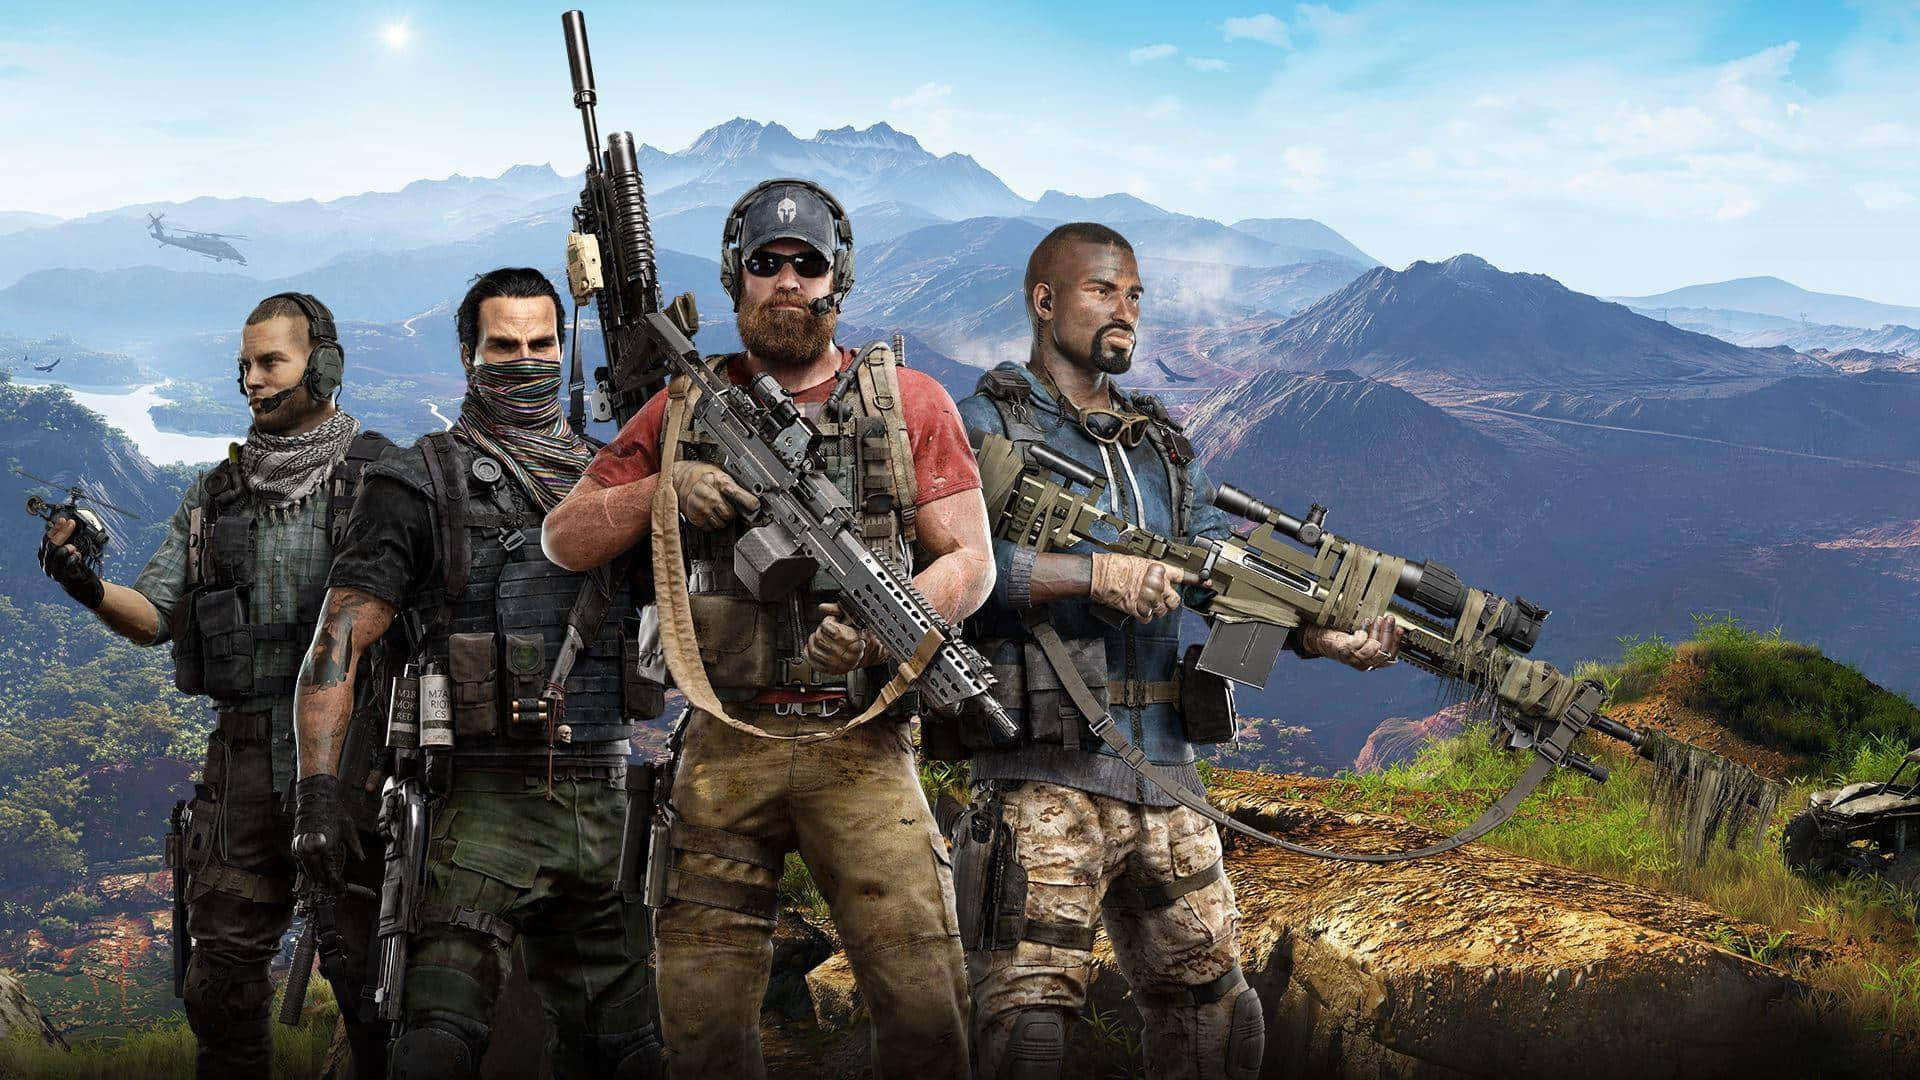 The official Tom Clancy's Ghost Recon Wildlands In-Game Wallpaper